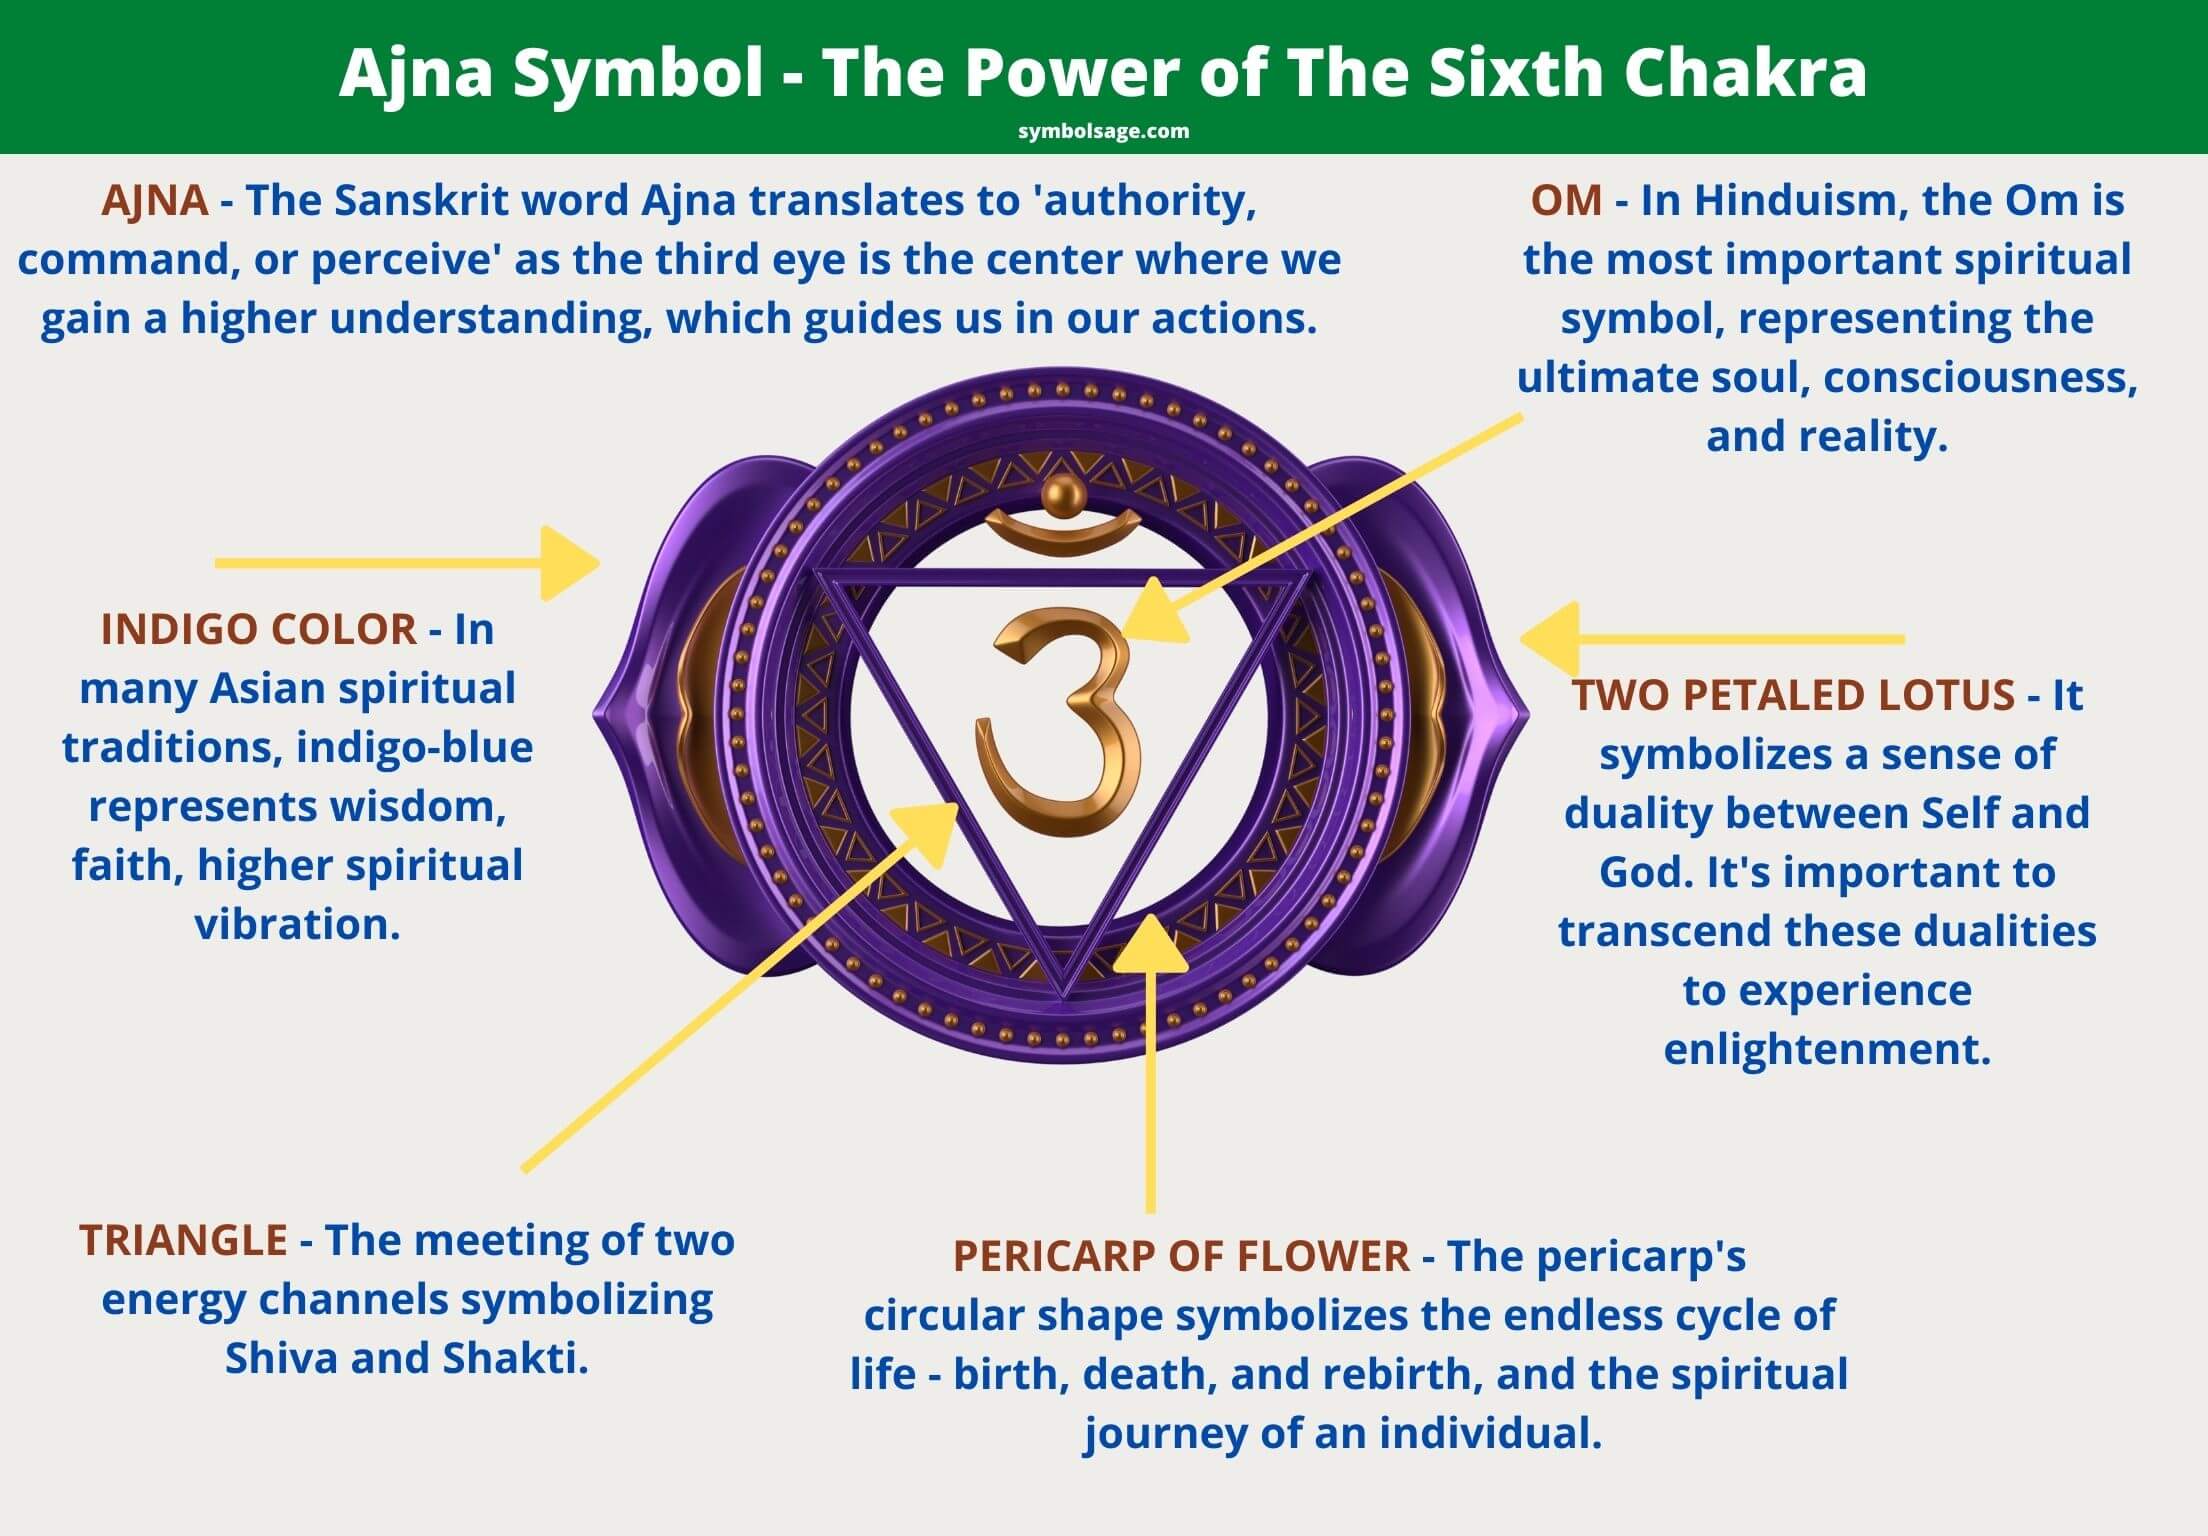 Breaking down the ajna symbol